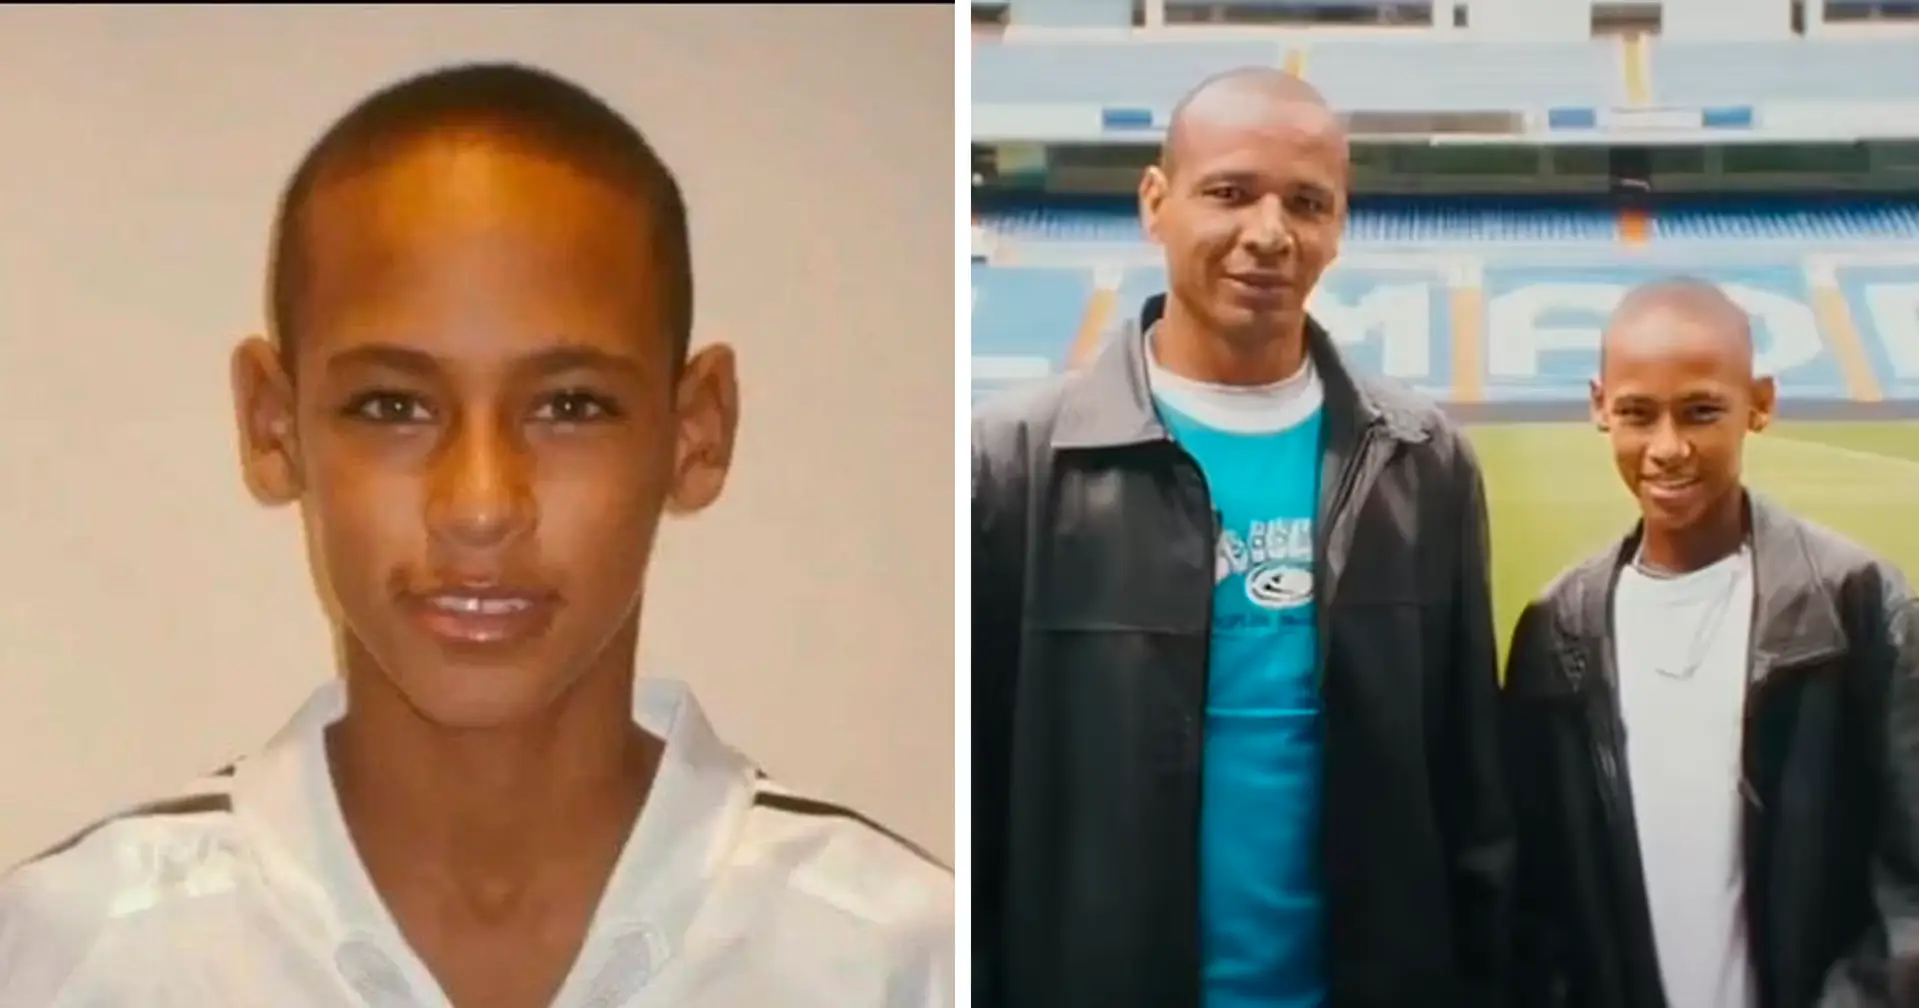 Old photos of Neymar reveal how close he was to joining Real Madrid as a 13-year-old